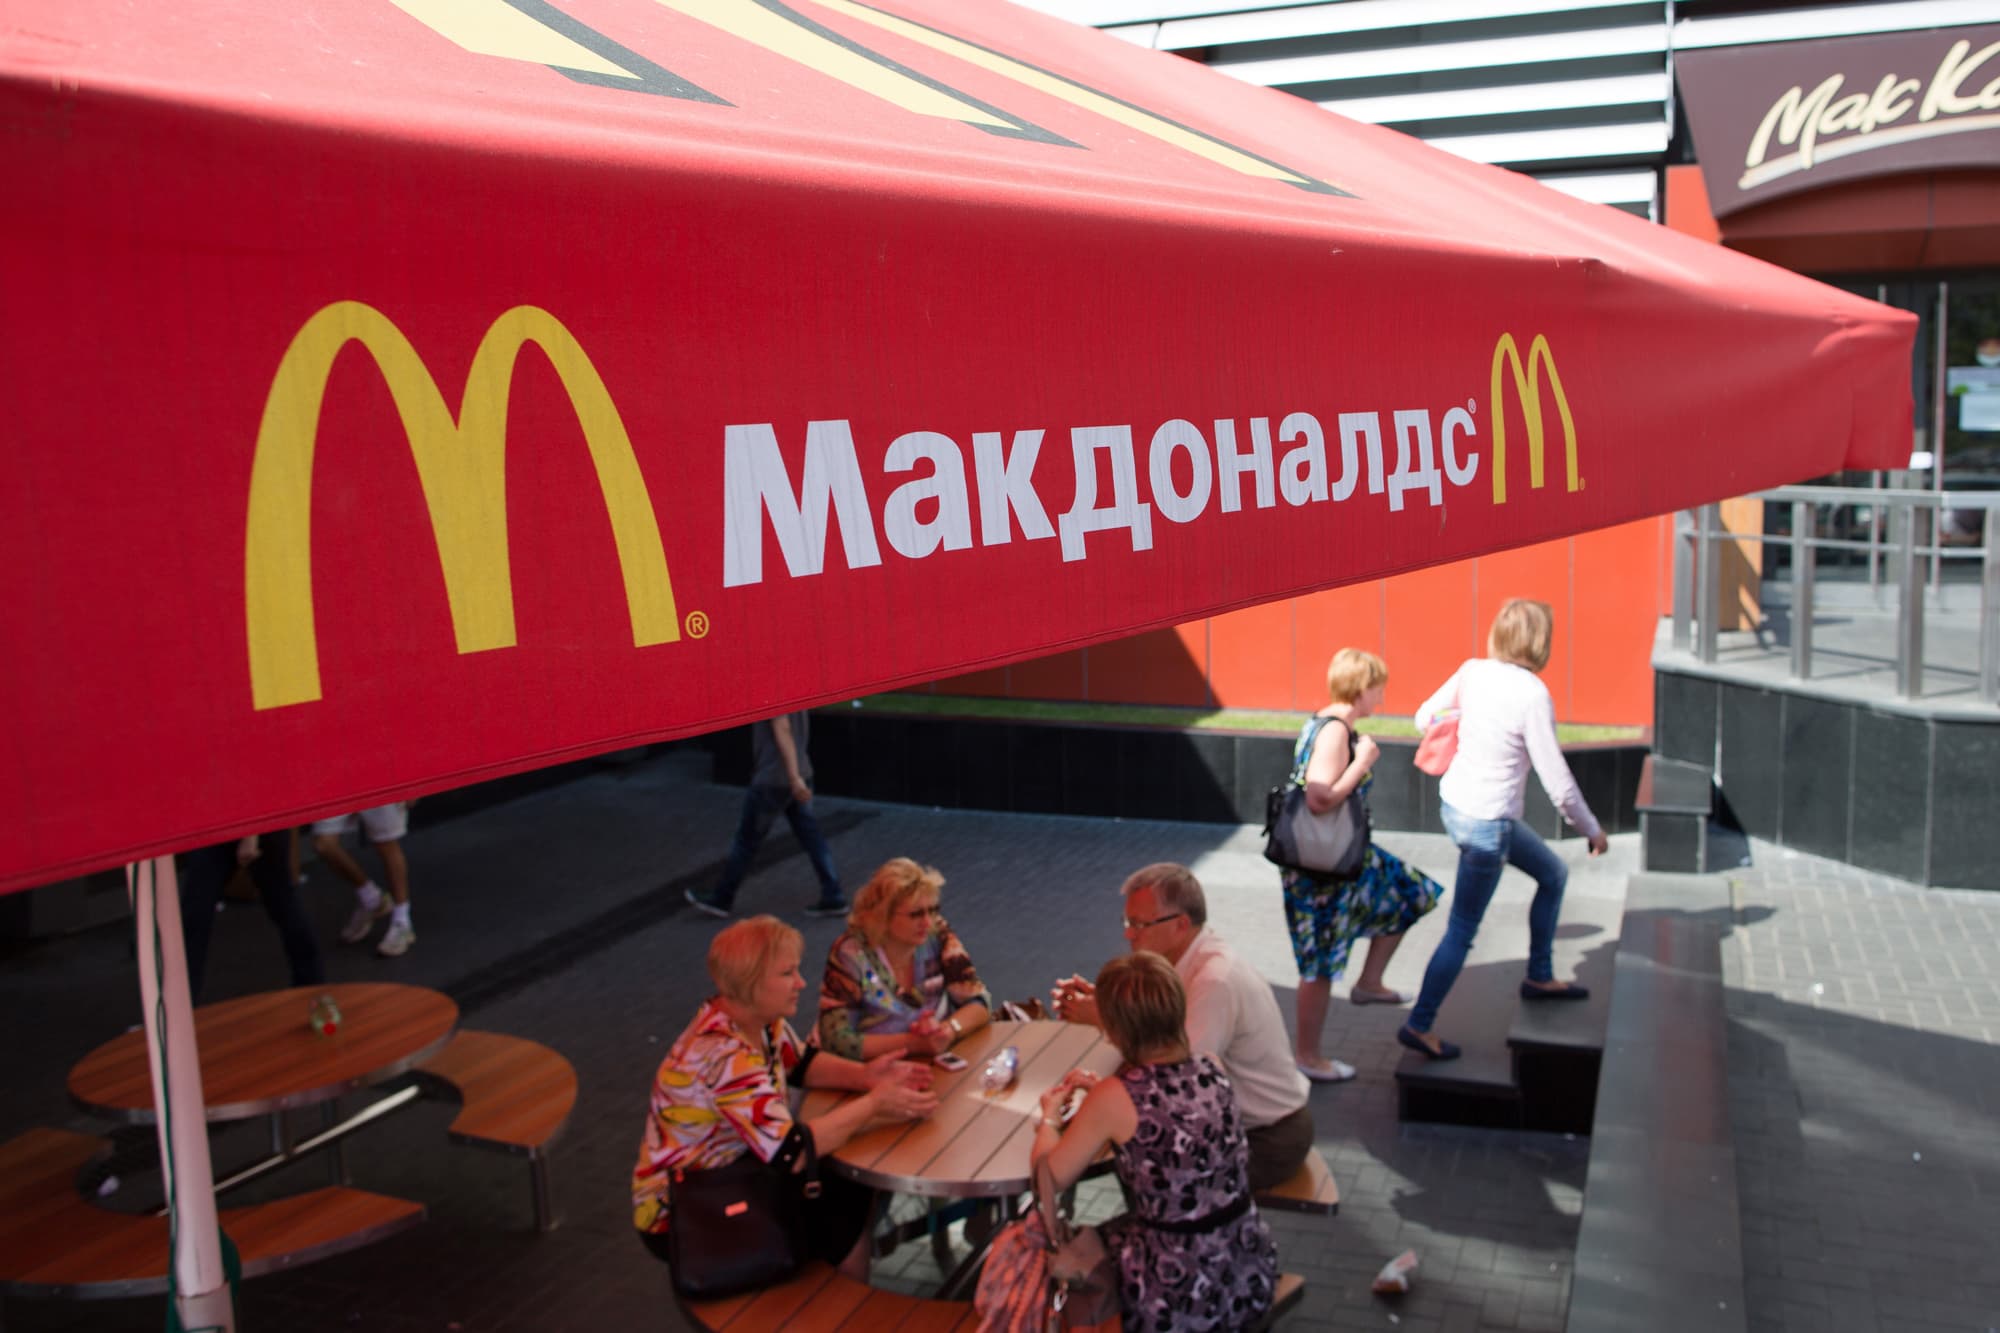 McDonald’s declines to comment on war, has exposure in Russia